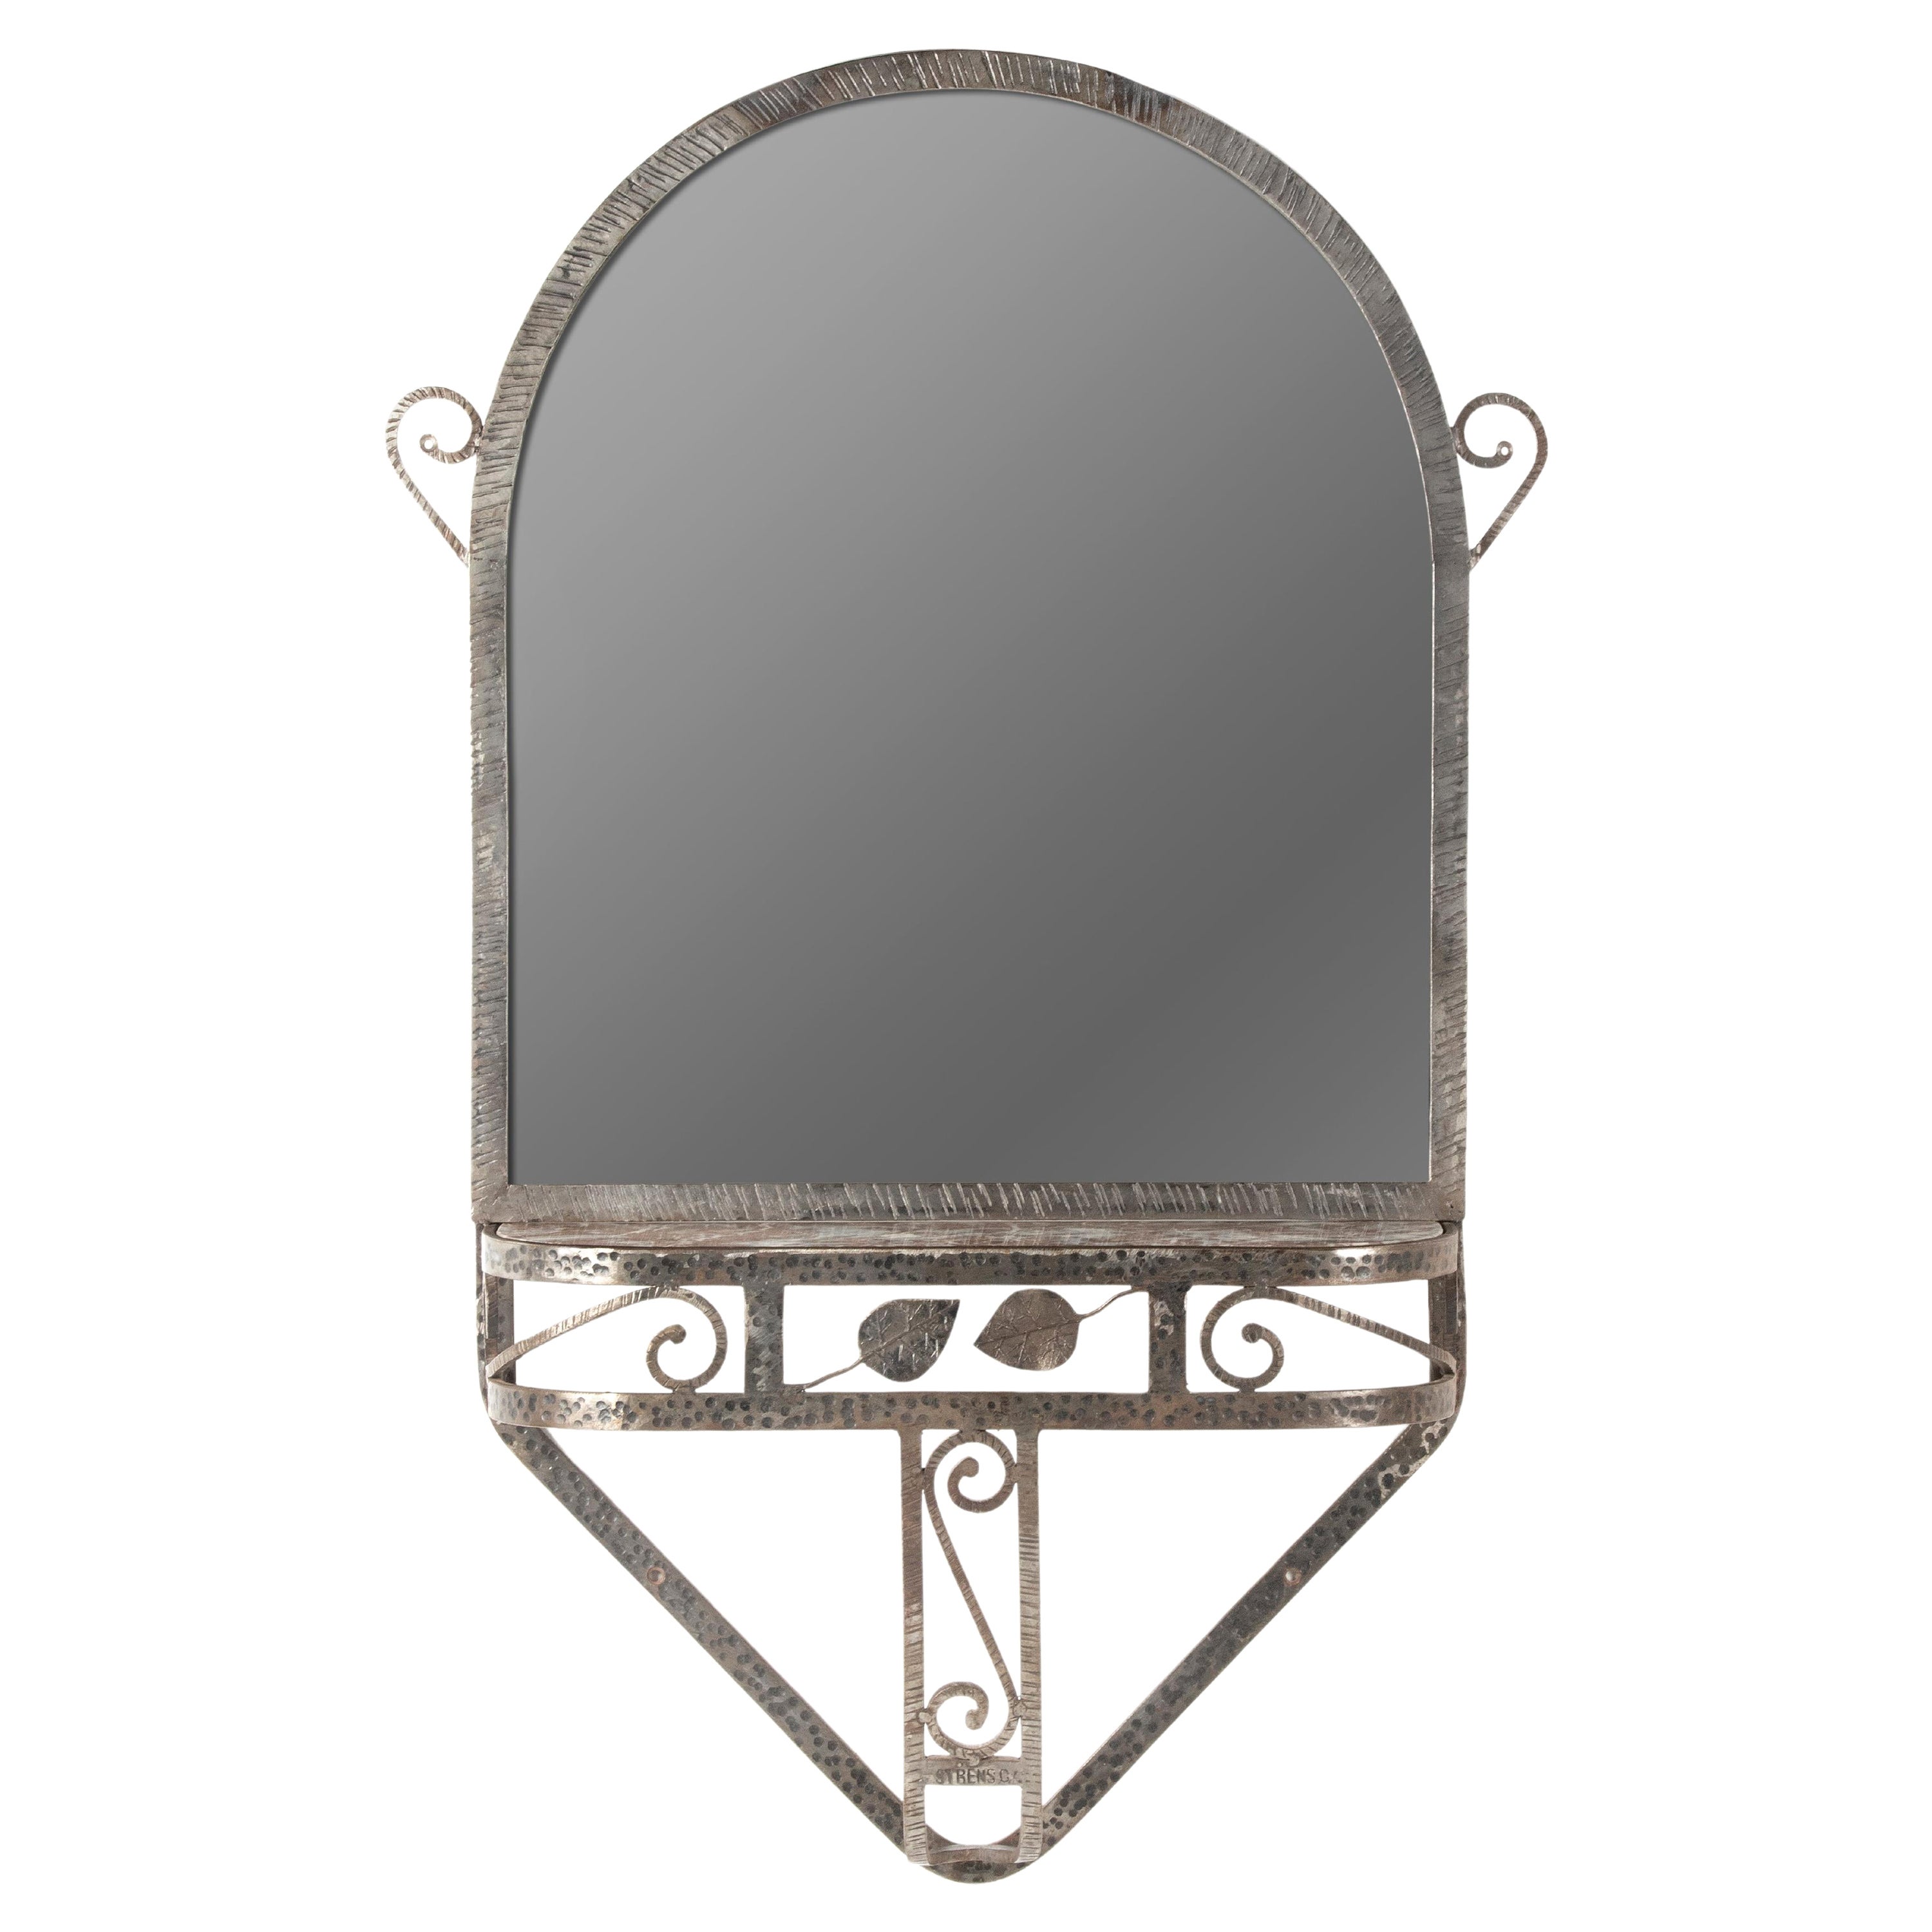 Art Deco Period Wrought Iron Wall Mirror with Marble Console, Strens